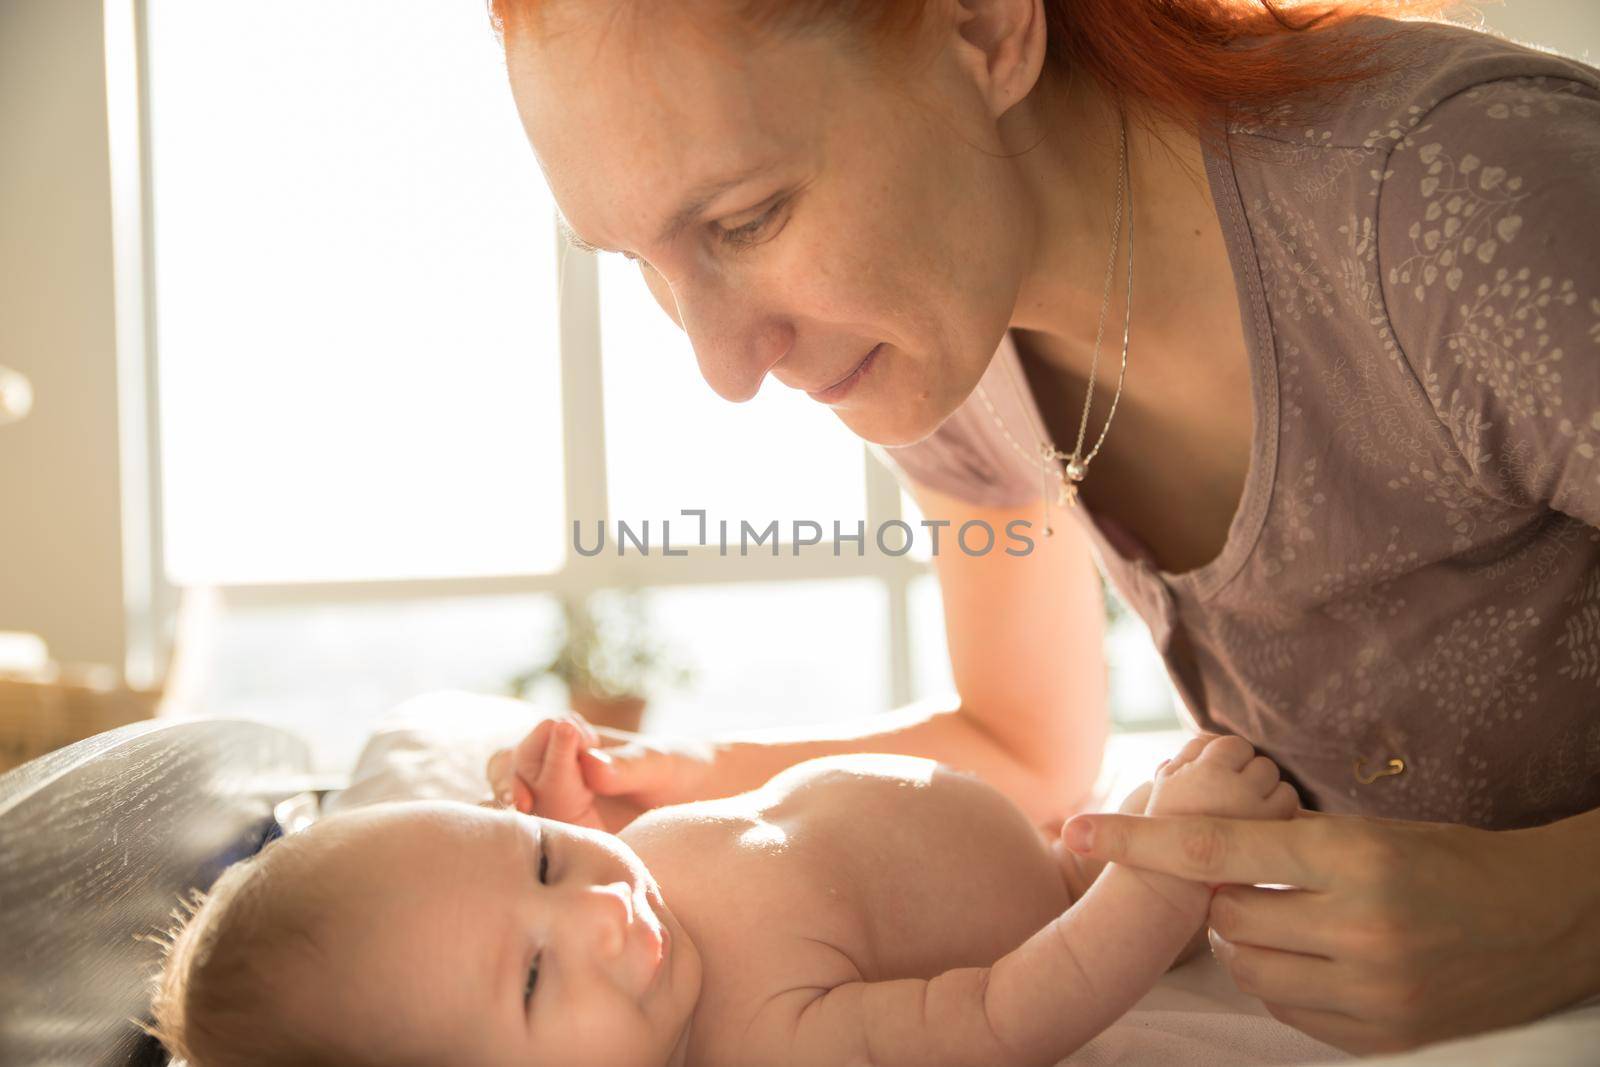 Smiling mother takes care of her small baby lying on a bed. Mid shot